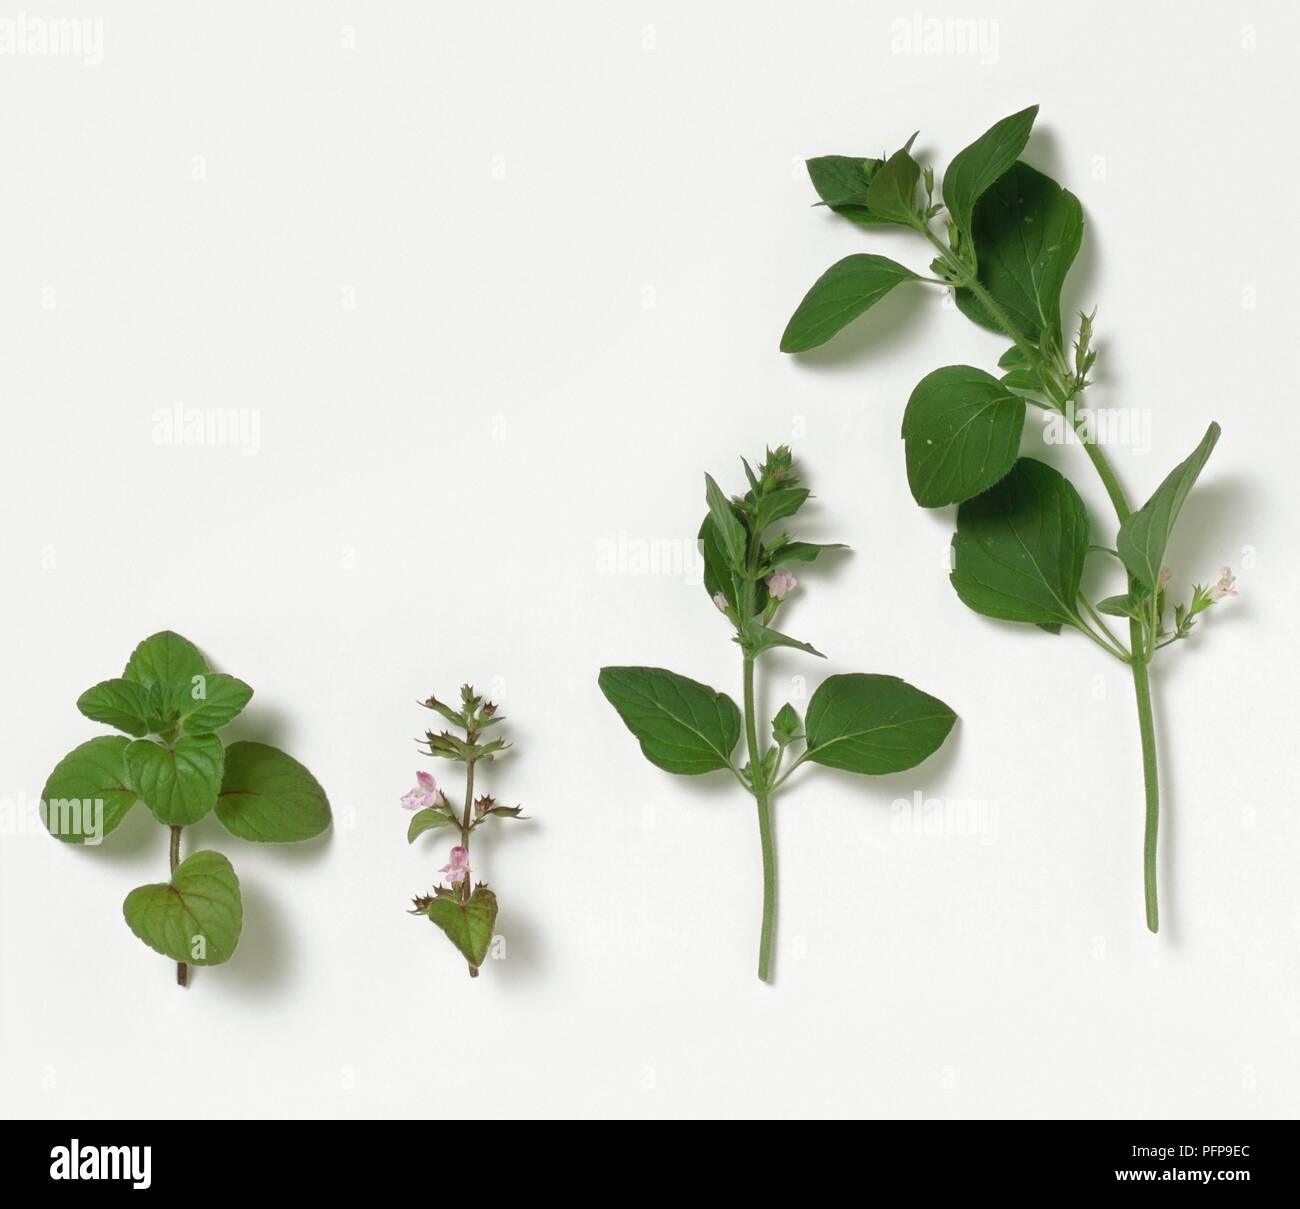 Calamintha sylvatica (Calamint), four sprigs with leaves and flowers Stock Photo